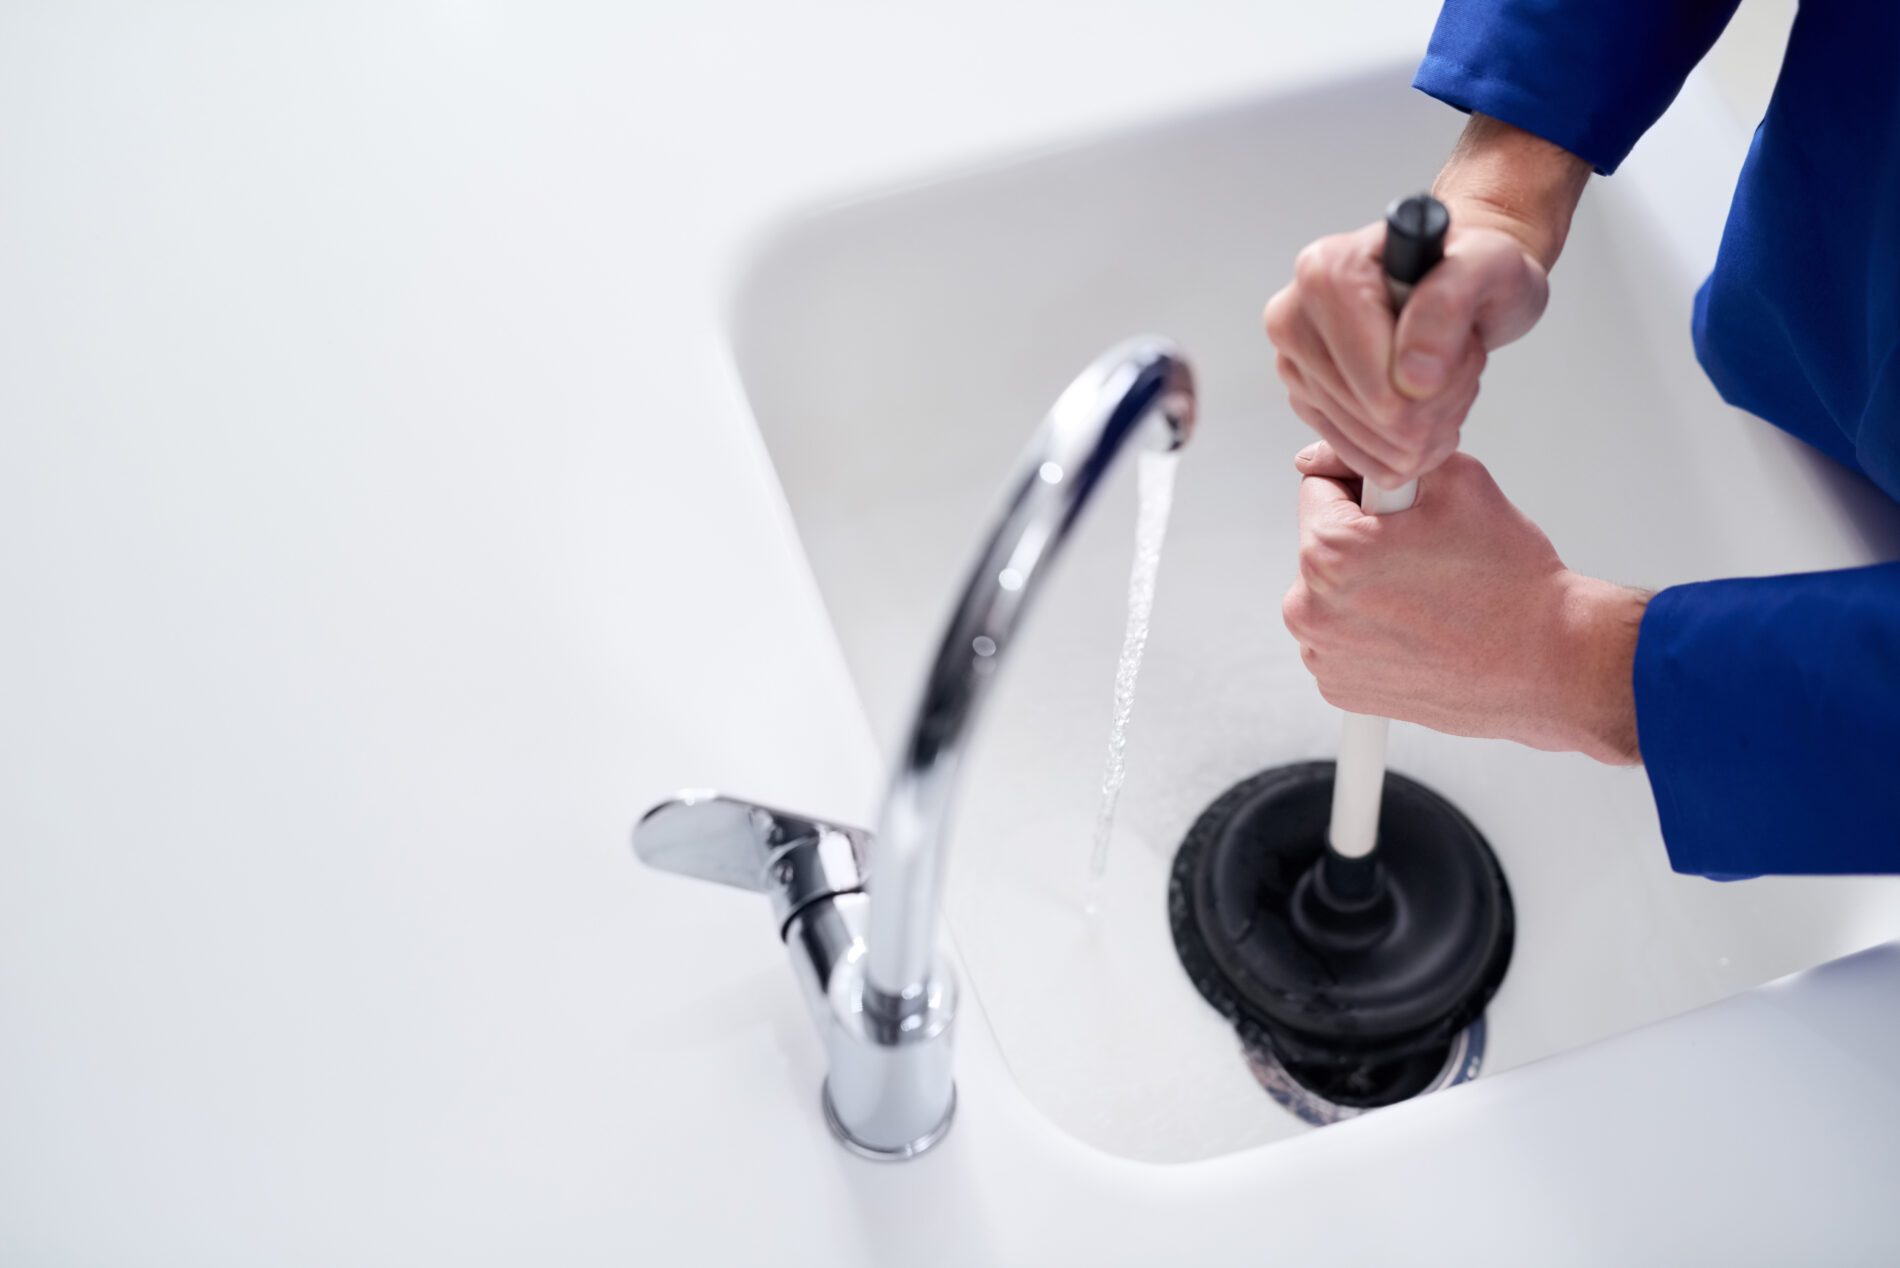 The Best and #1 Drain Cleaning Service in Garland- AC Repair